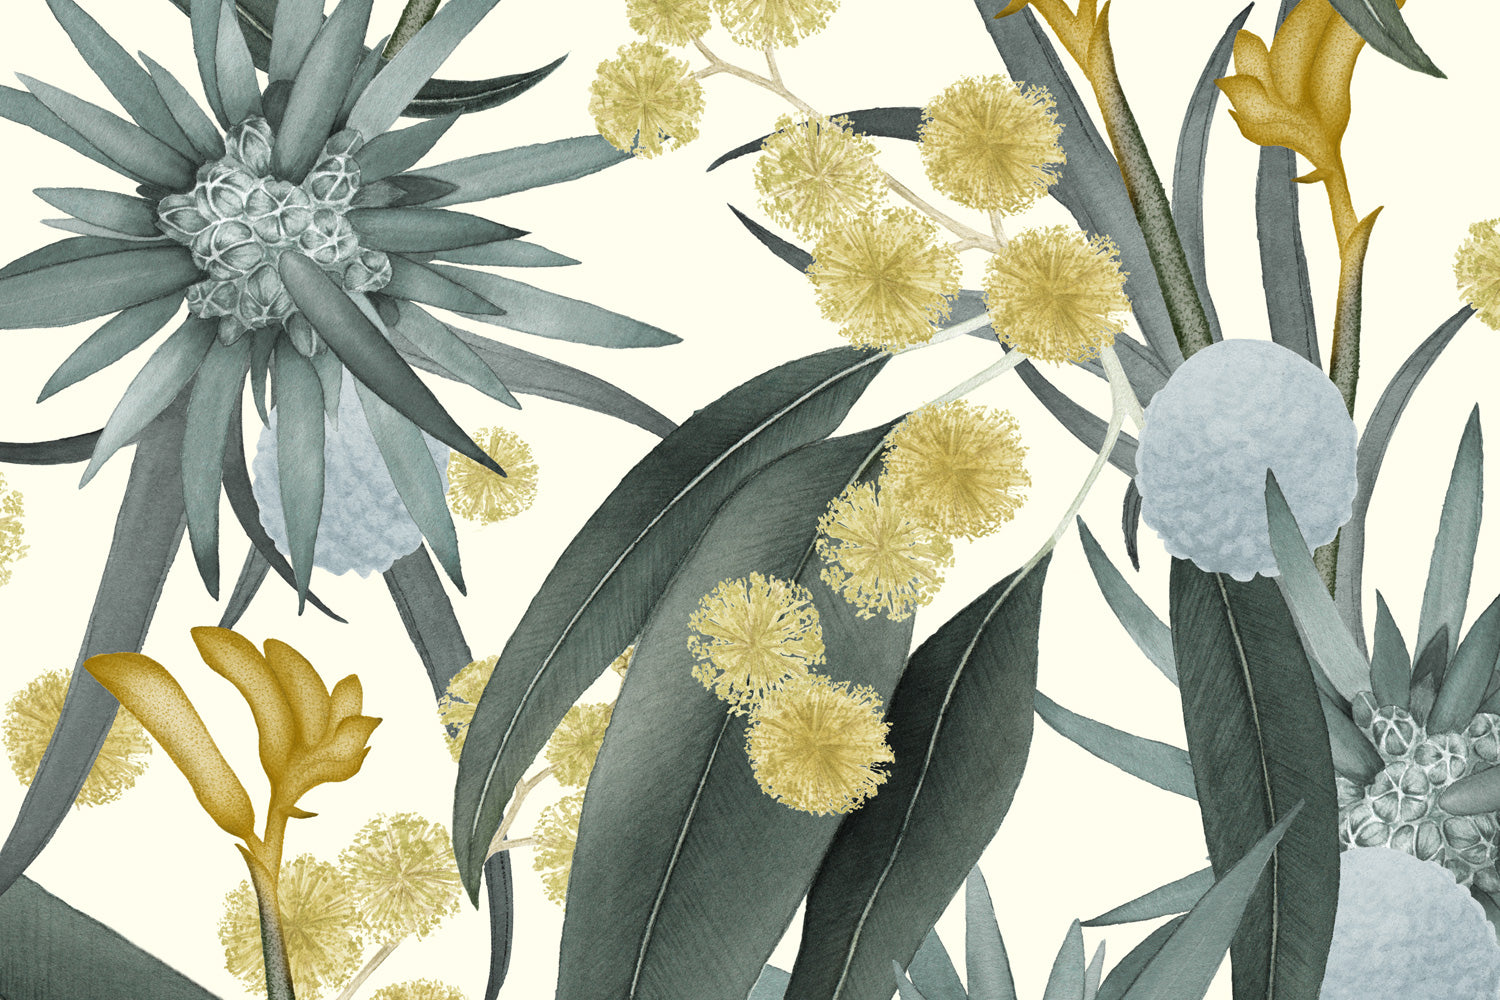 Detail of wallpaper in a large-scale botanical print in shades of blue, turquoise and yellow on a cream field.